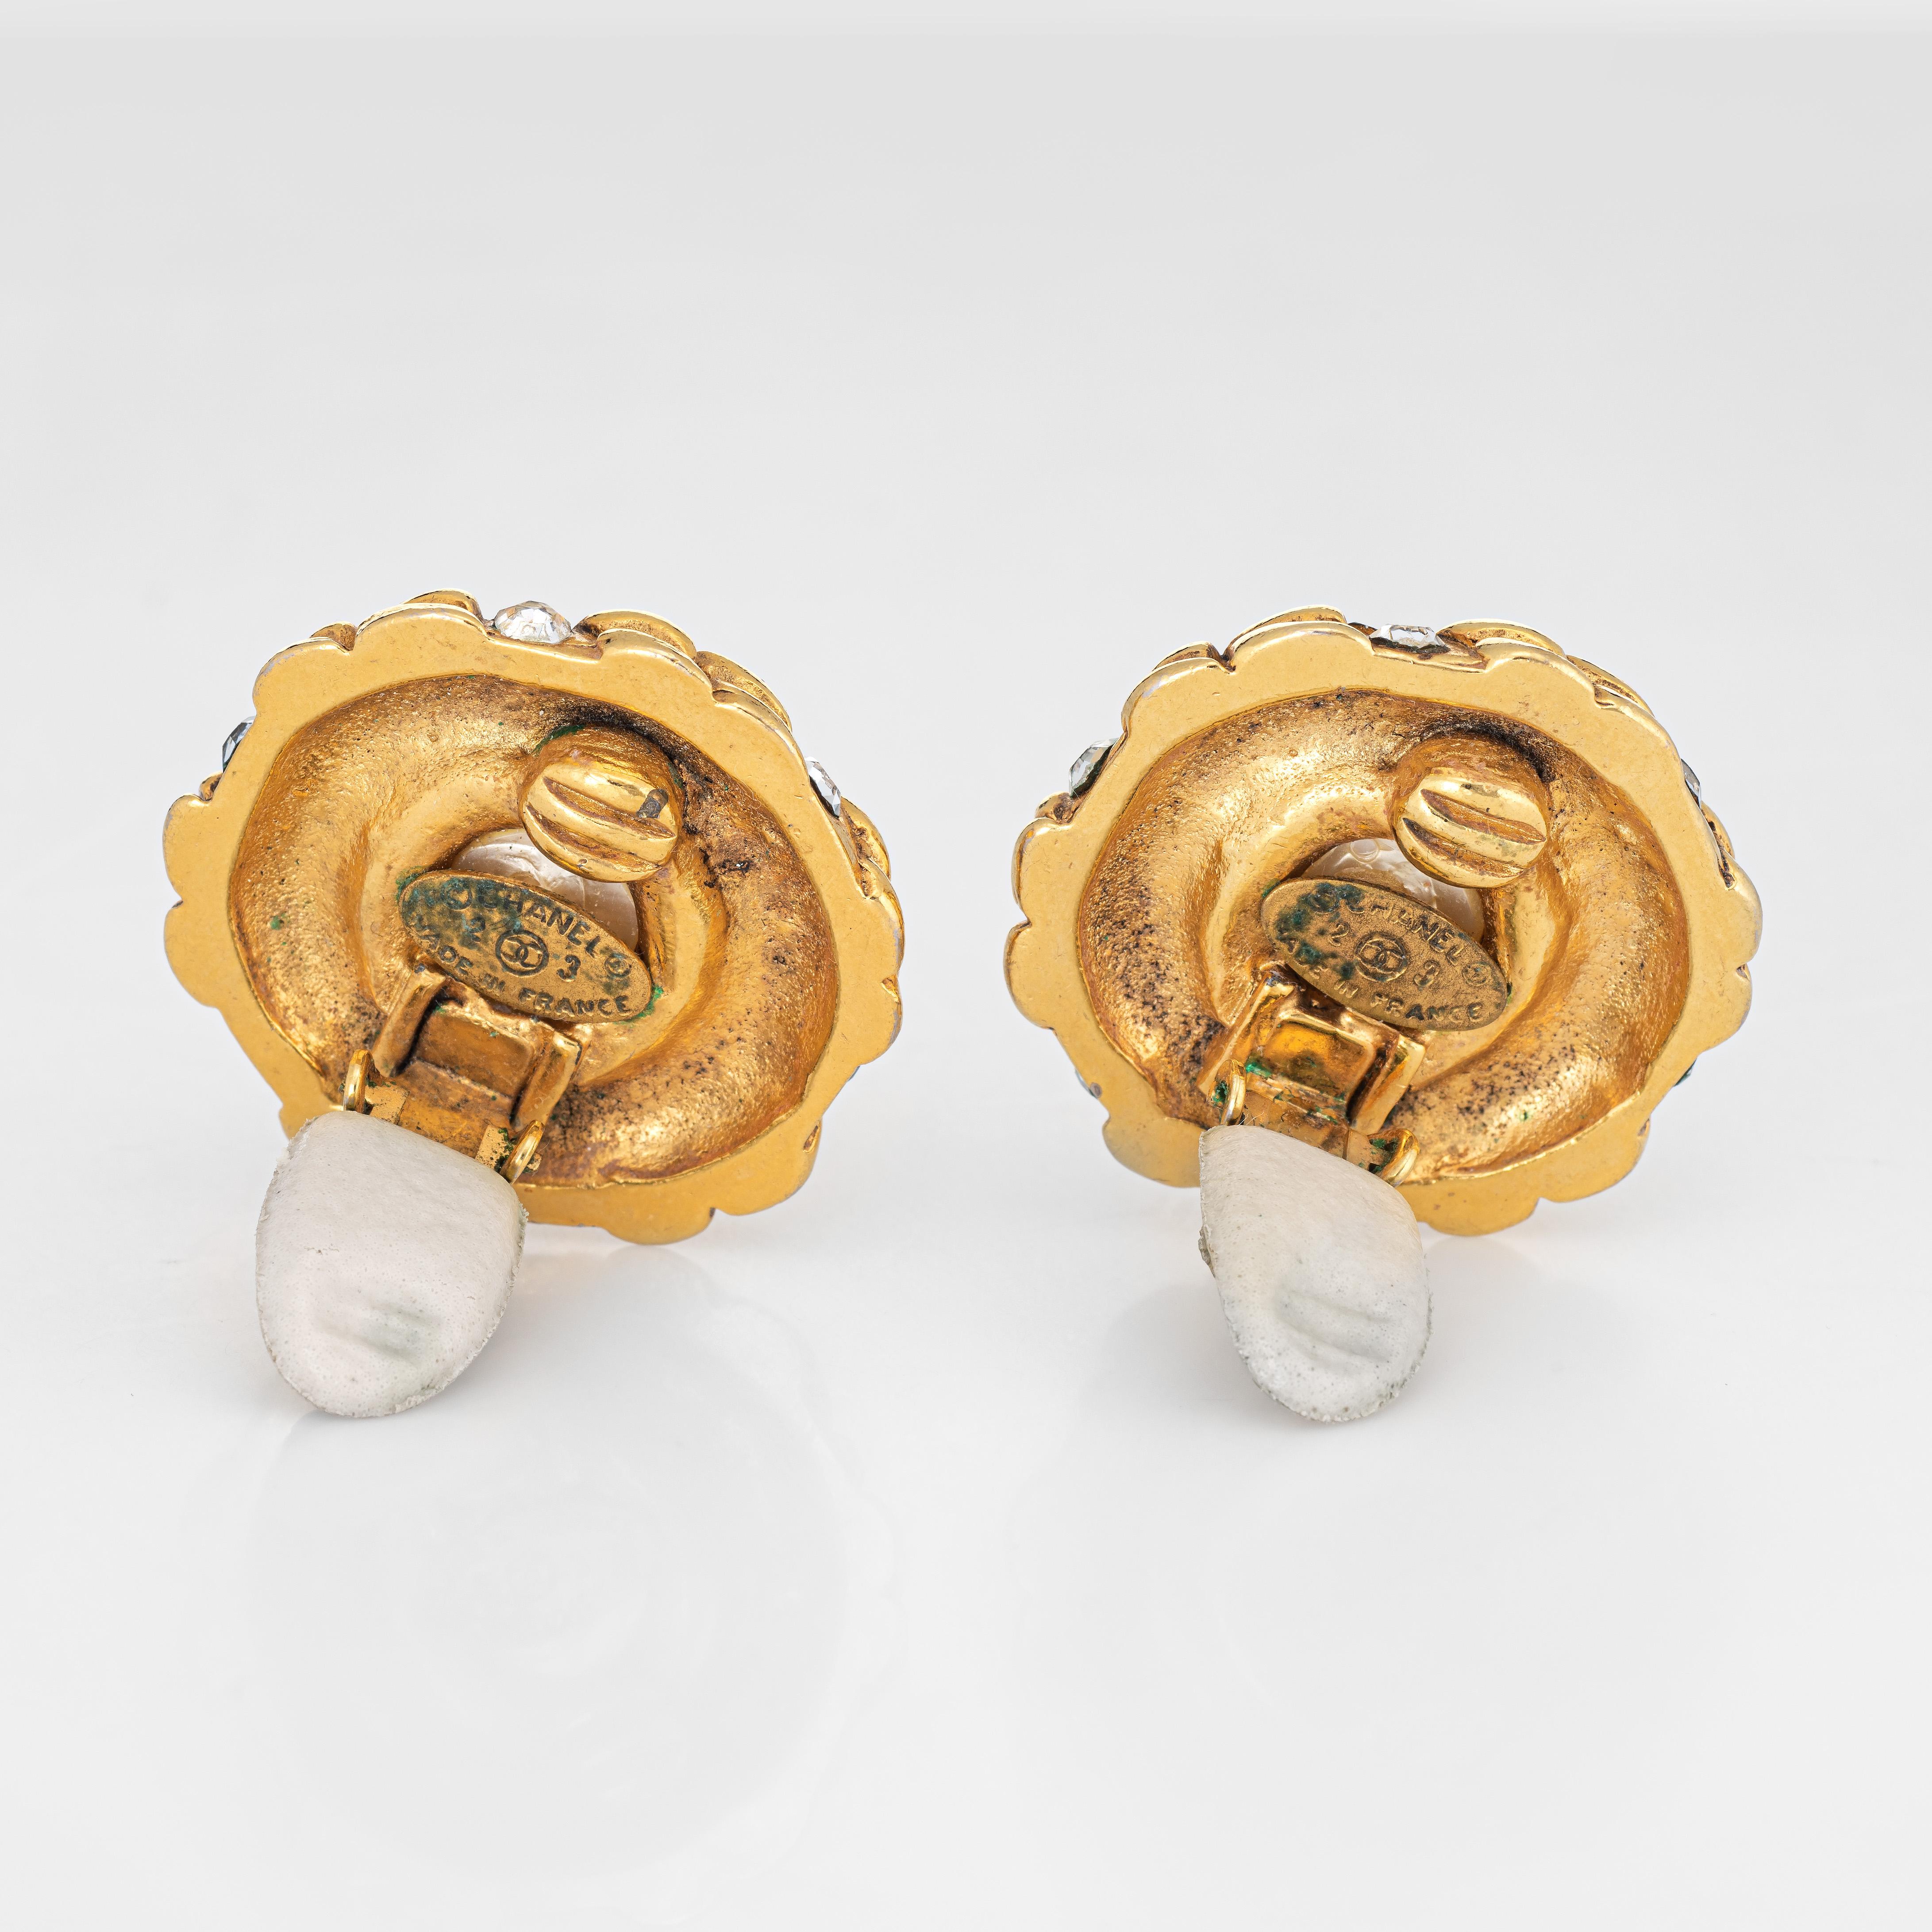 Vintage Chanel clip on earrings crafted in yellow gold tone (circa mid-1980s). 

The earrings are set with faux pearls to the center (16mm) accented with white crystals. The crystals are in-tact in good condition. The earrings date to the mid-1980s